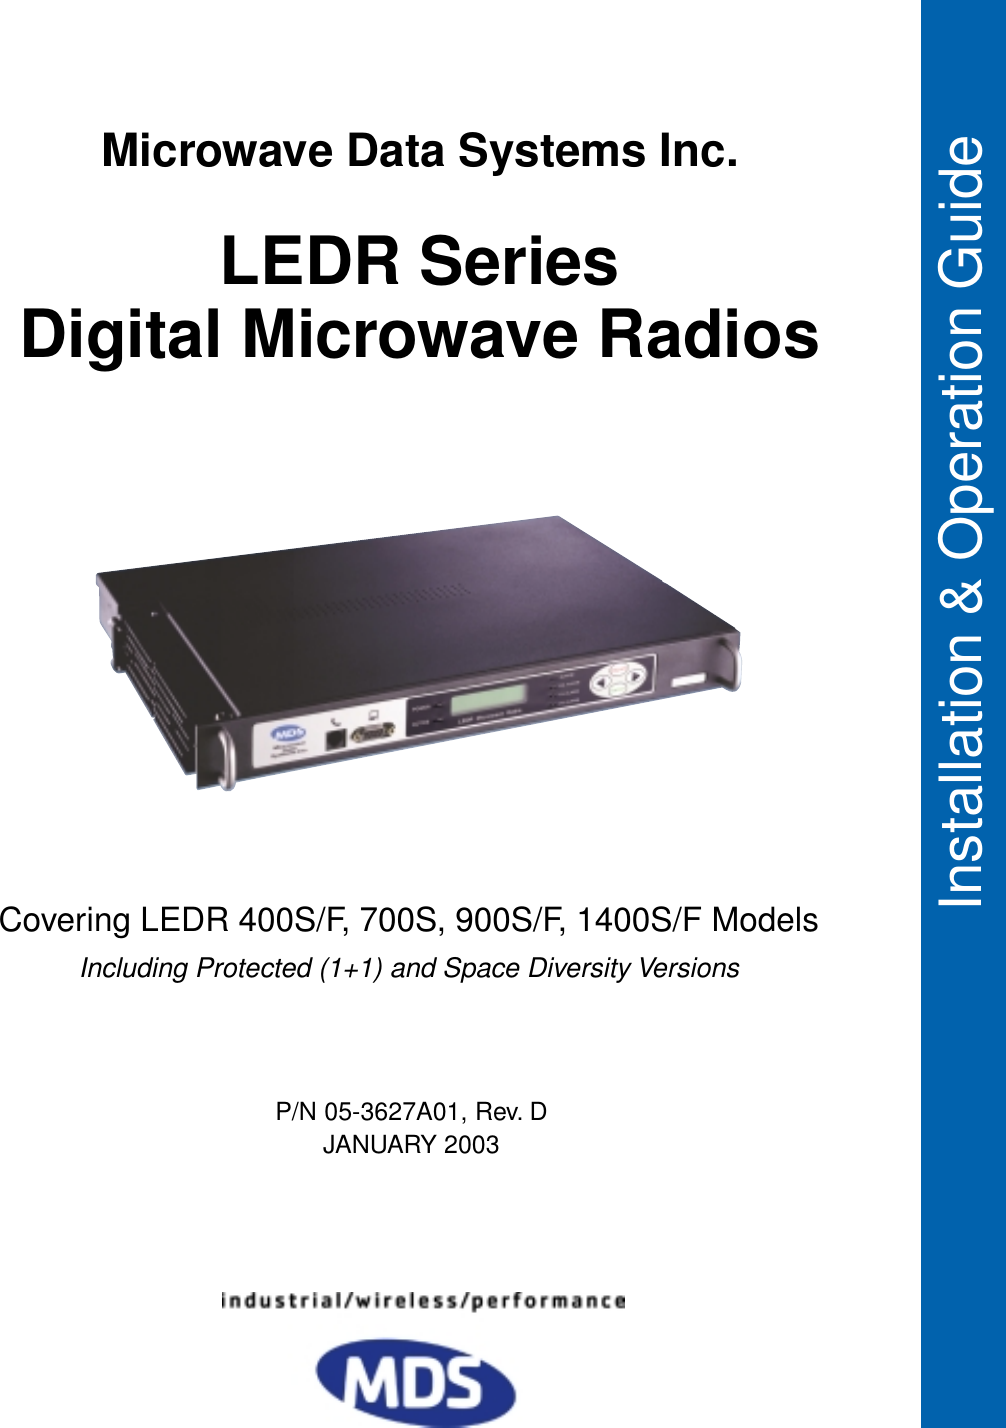  Installation &amp; Operation Guide P/N 05-3627A01, Rev. DJANUARY 2003 Covering LEDR 400S/F, 700S, 900S/F, 1400S/F Models Including Protected (1+1) and Space Diversity Versions LEDR SeriesDigital Microwave Radios Microwave Data Systems Inc.